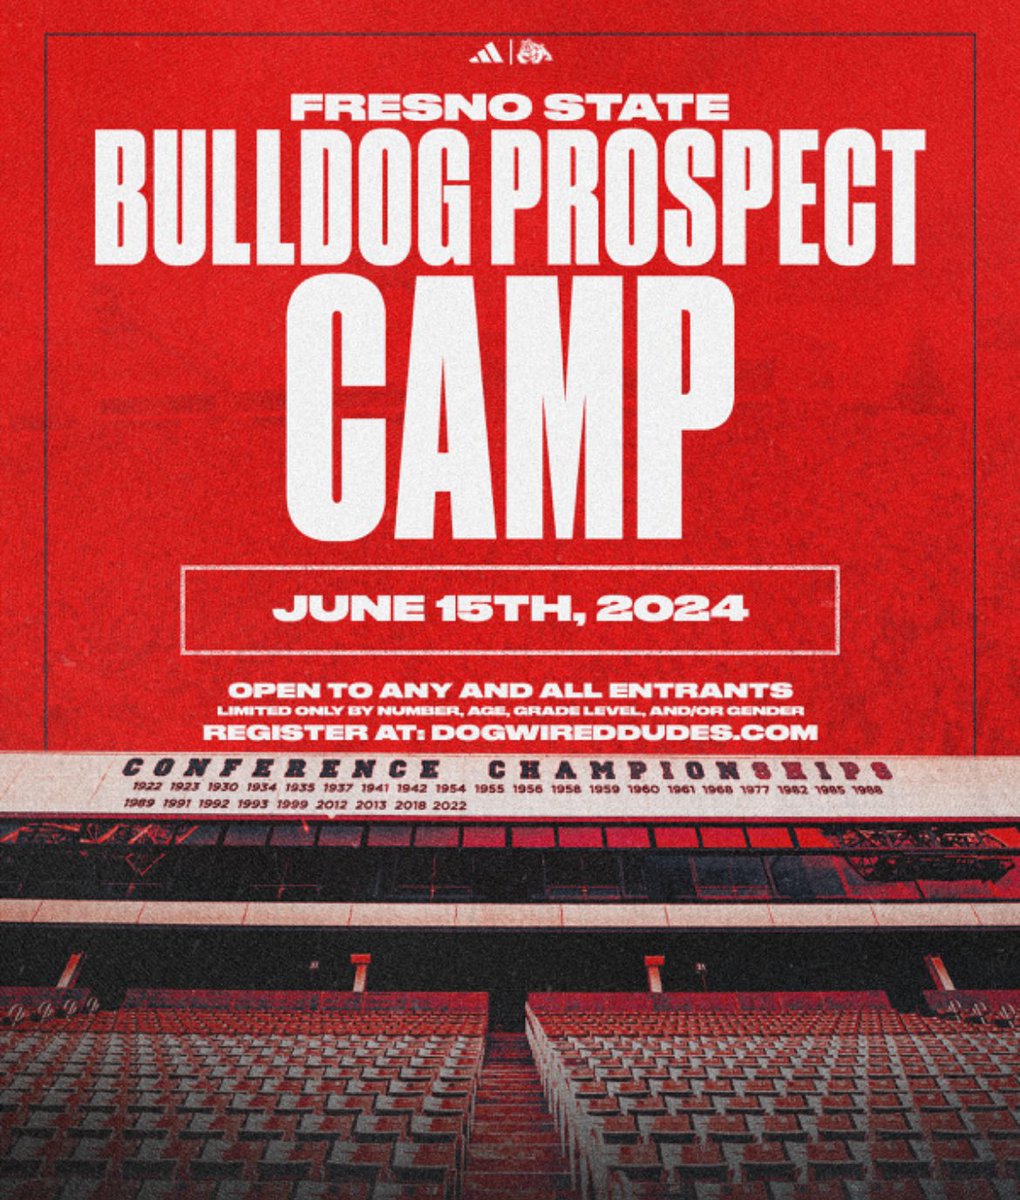 Thank you for the invite. Can’t wait to get up there. @BBSBucs @jakerasmussen_ @Coach_JTRankin @SoCalCoyotesTN @cfantastic0101